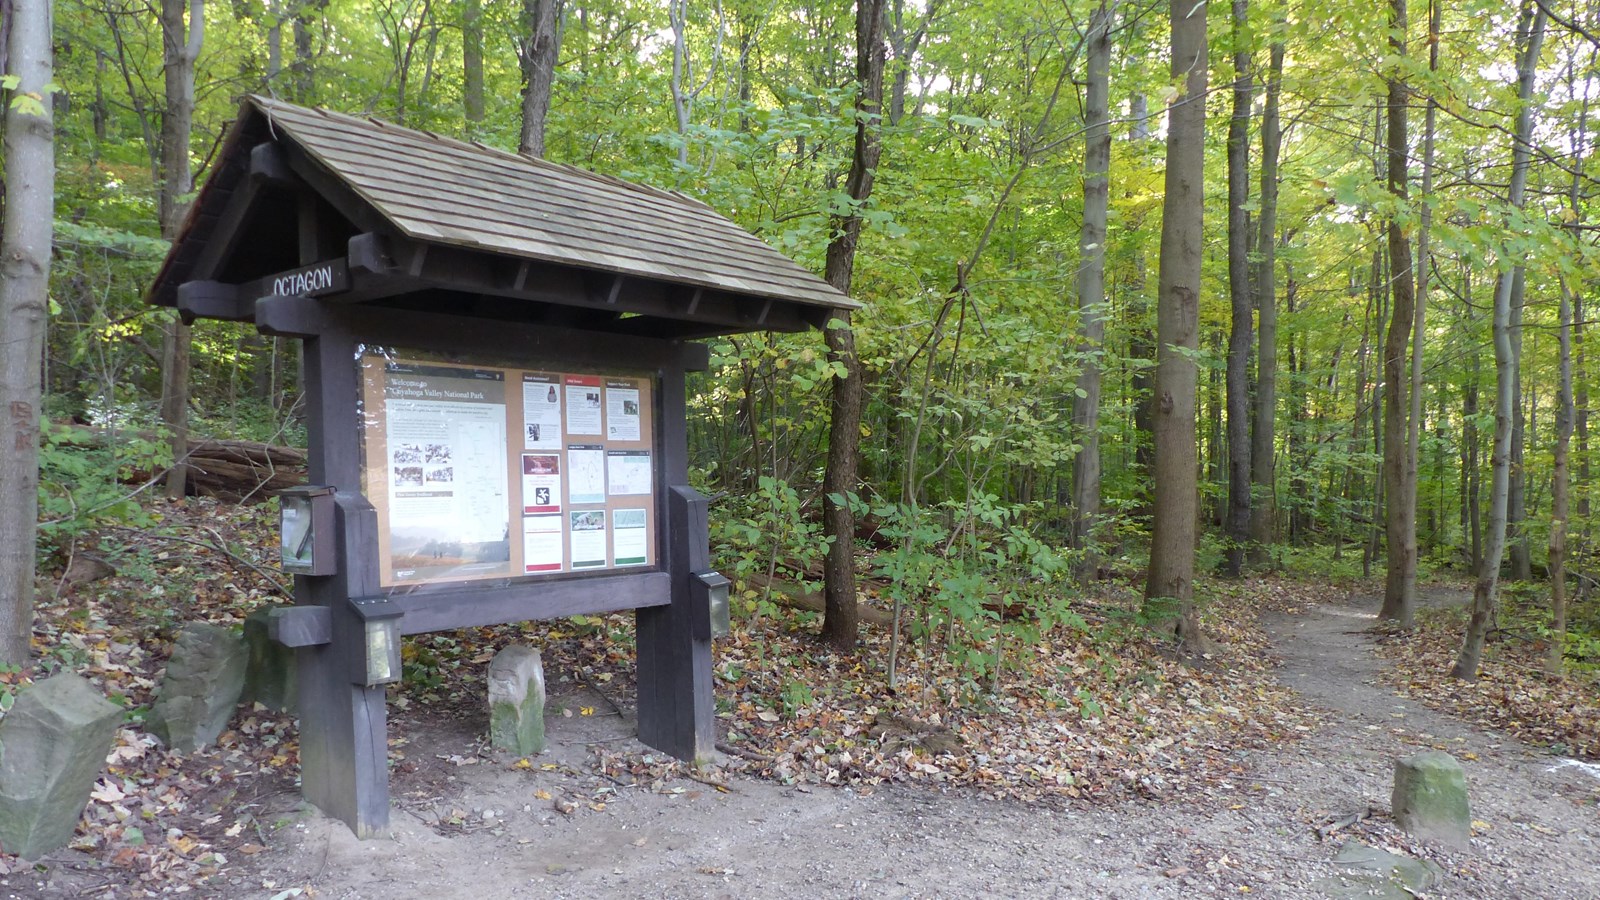 Brown “Octagon” bulletin board with roof and 3 map boxes. Unpaved trail leads right into the woods.